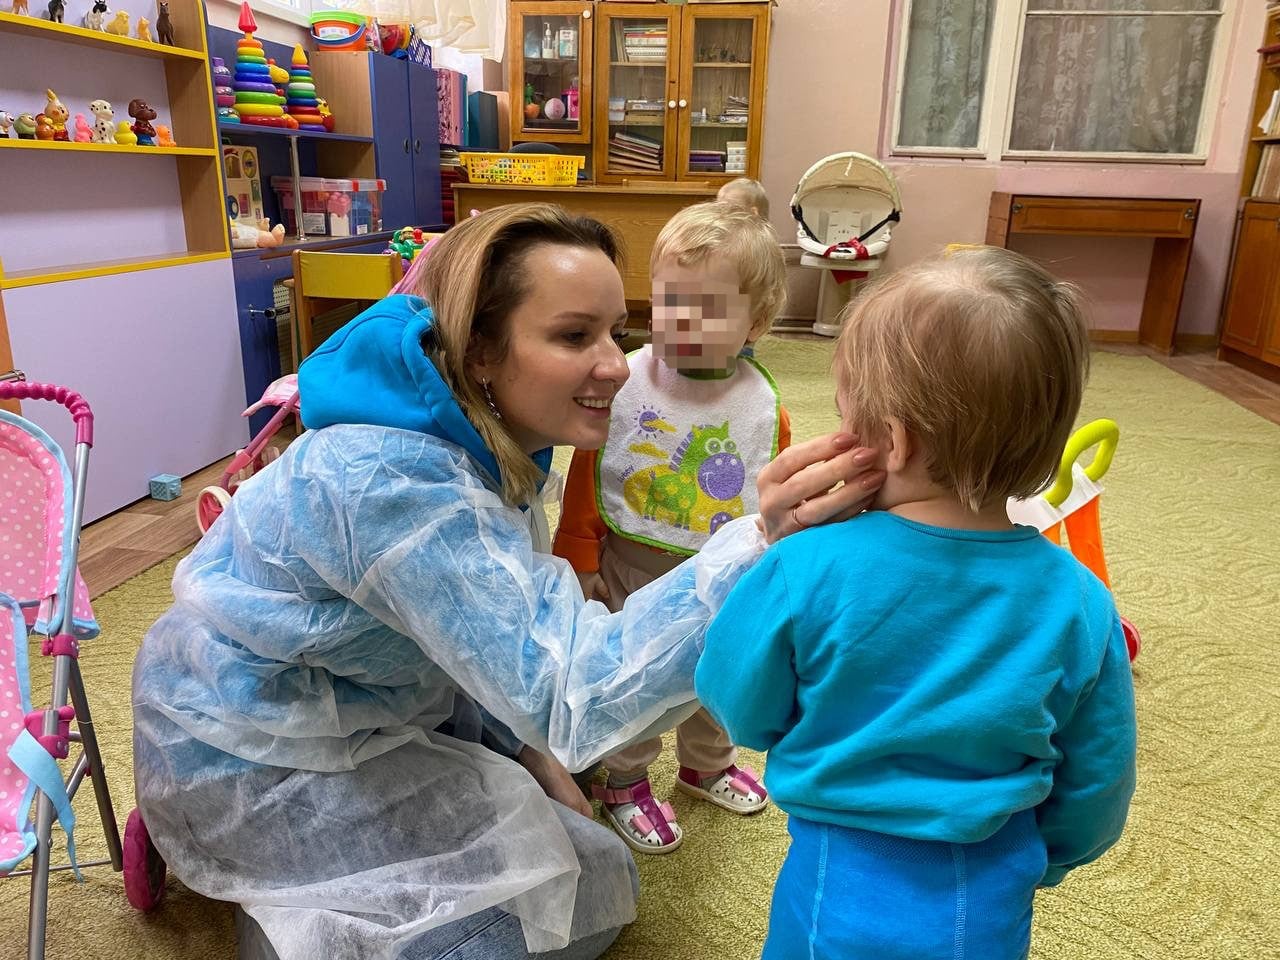 Russia’s children’s commissioner Maria Lvova-Belova posted a picture to Telegram in October 2022 of her visit to Ukrainian toddlers in occupied Crimea, who had been in Kherson